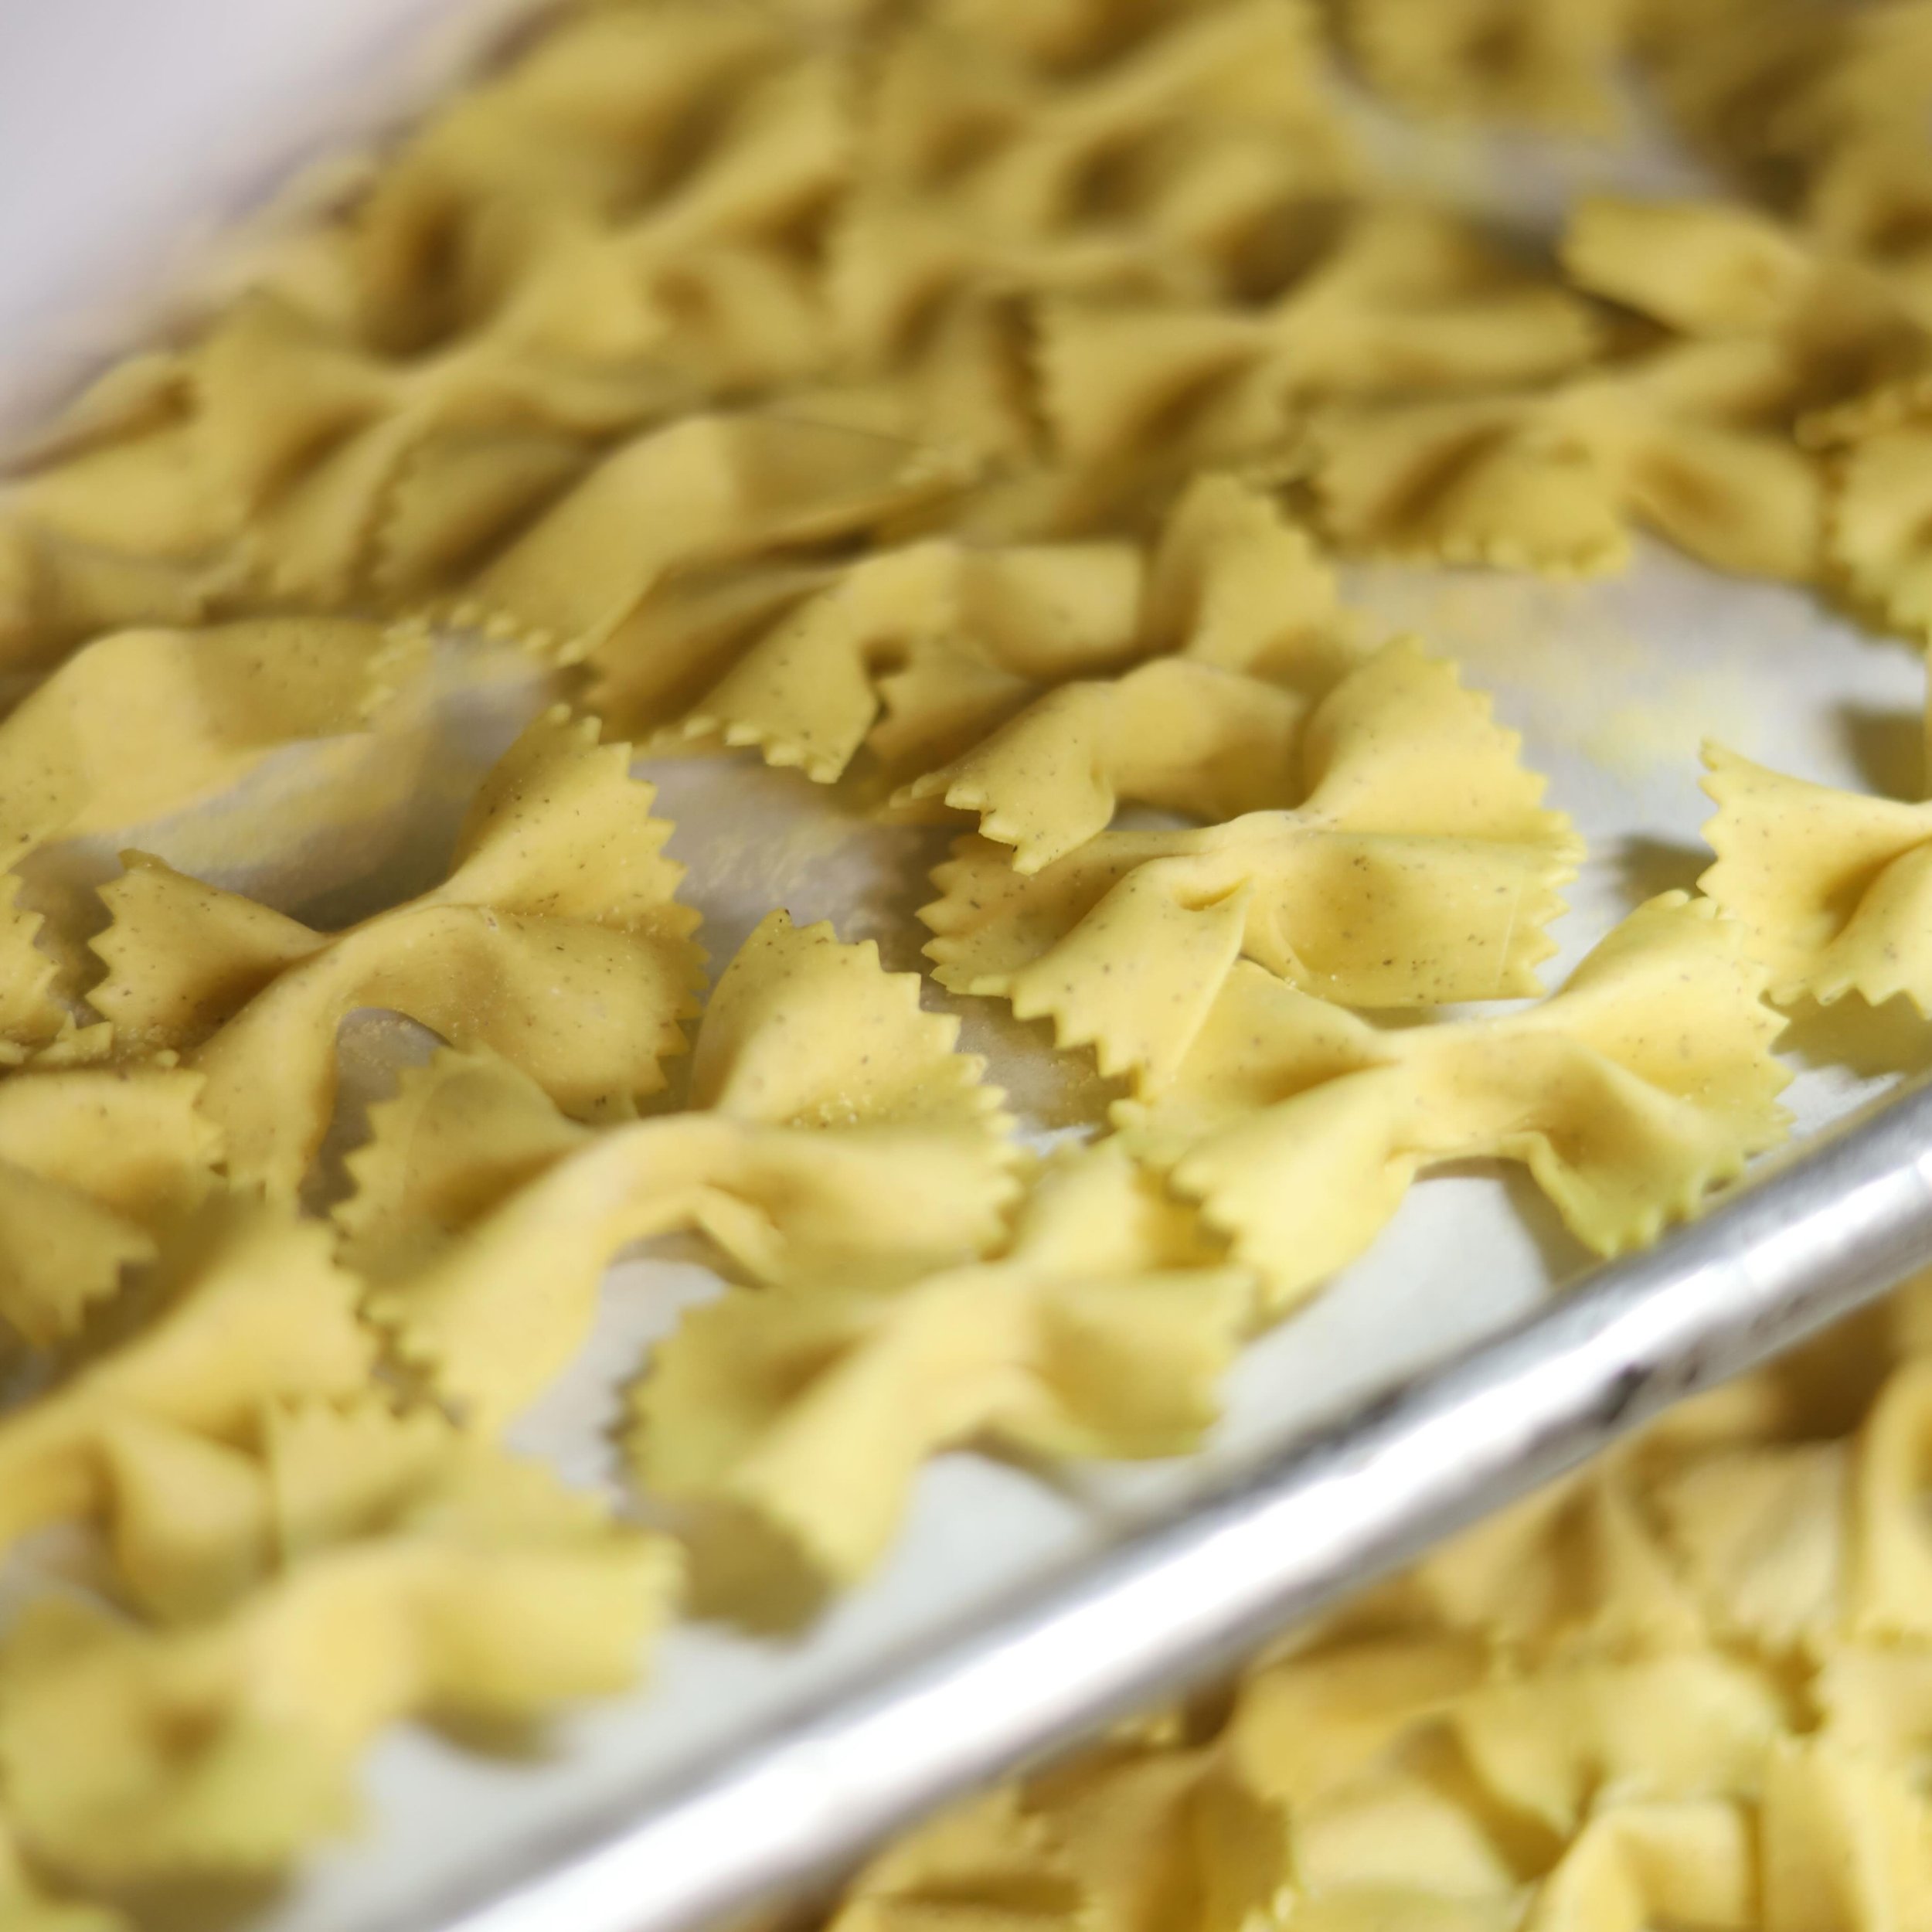 🍝 We make our pasta, bread, desserts, and more from scratch in-house every day. 

#philly #phillyfood #phillyfoodiefinder #osteriaphilly #phillypasta #pastanight #pizzanight #northernitalian #springgarden #fairmount #happyhour #phillyhappyhour #outd